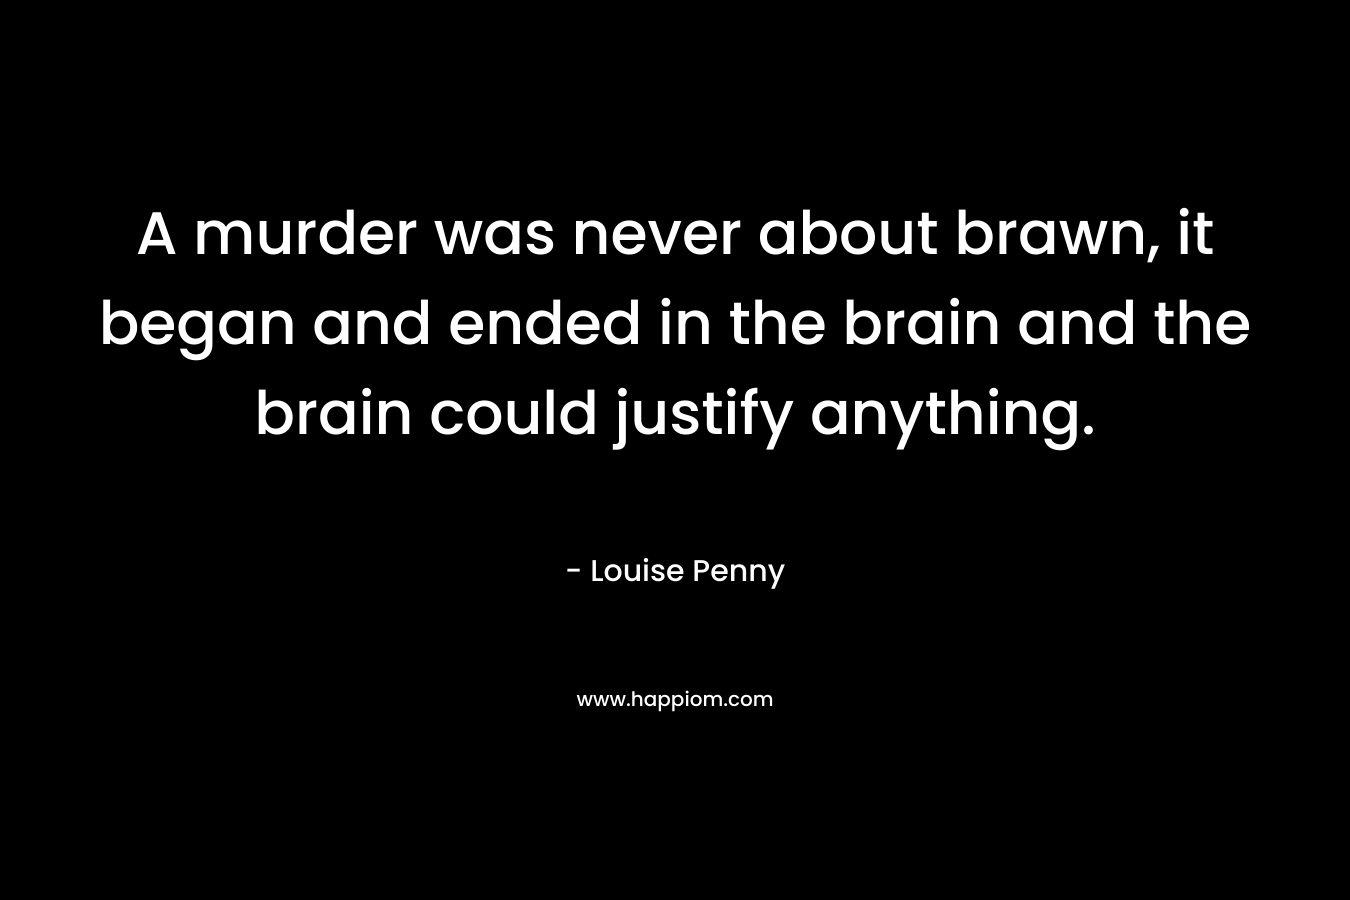 A murder was never about brawn, it began and ended in the brain and the brain could justify anything. – Louise Penny